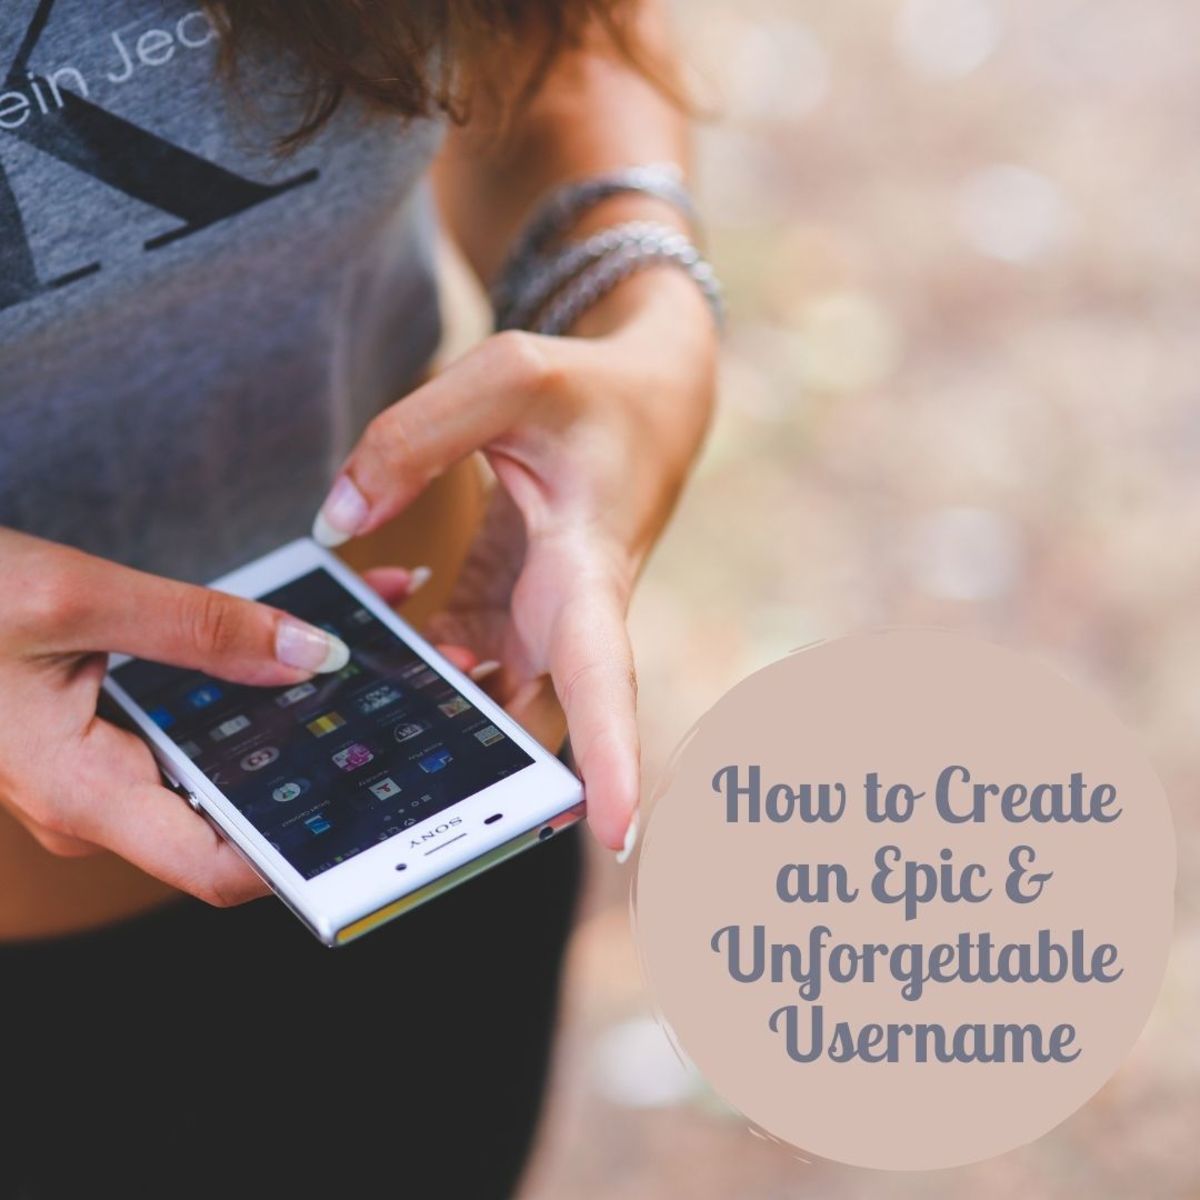 Learn how you can come up with an awesome username for social media!